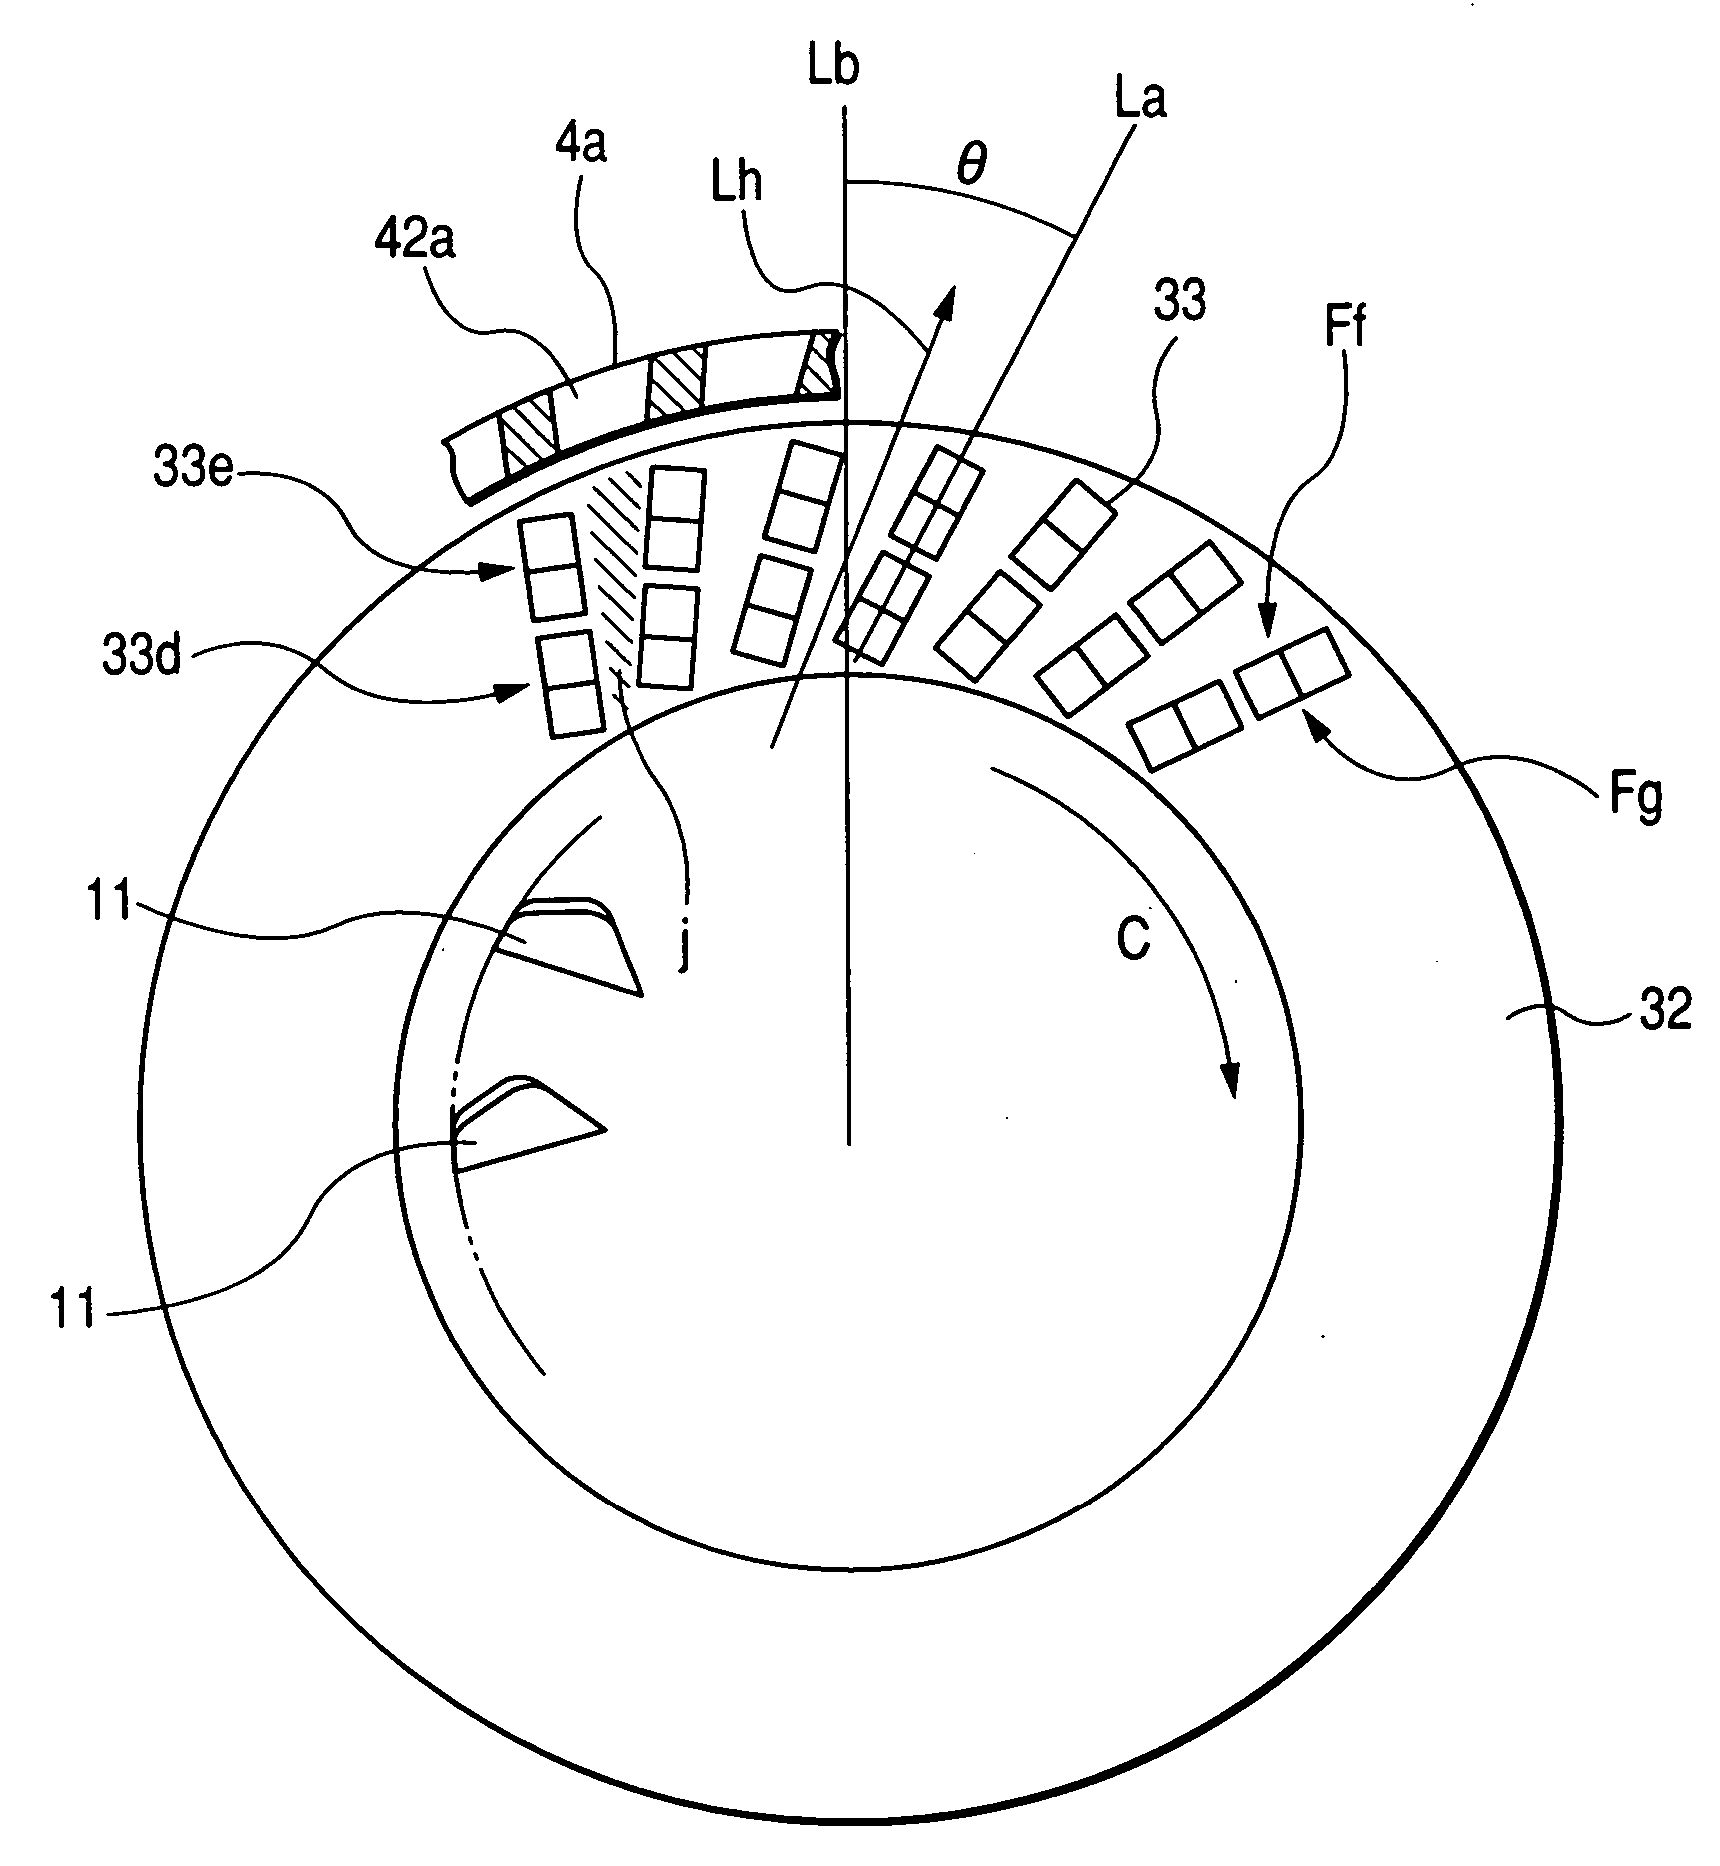 Vehicle AC generator having connection portions of stator winding conductor segments oriented in accordance with direction of cooling air flow